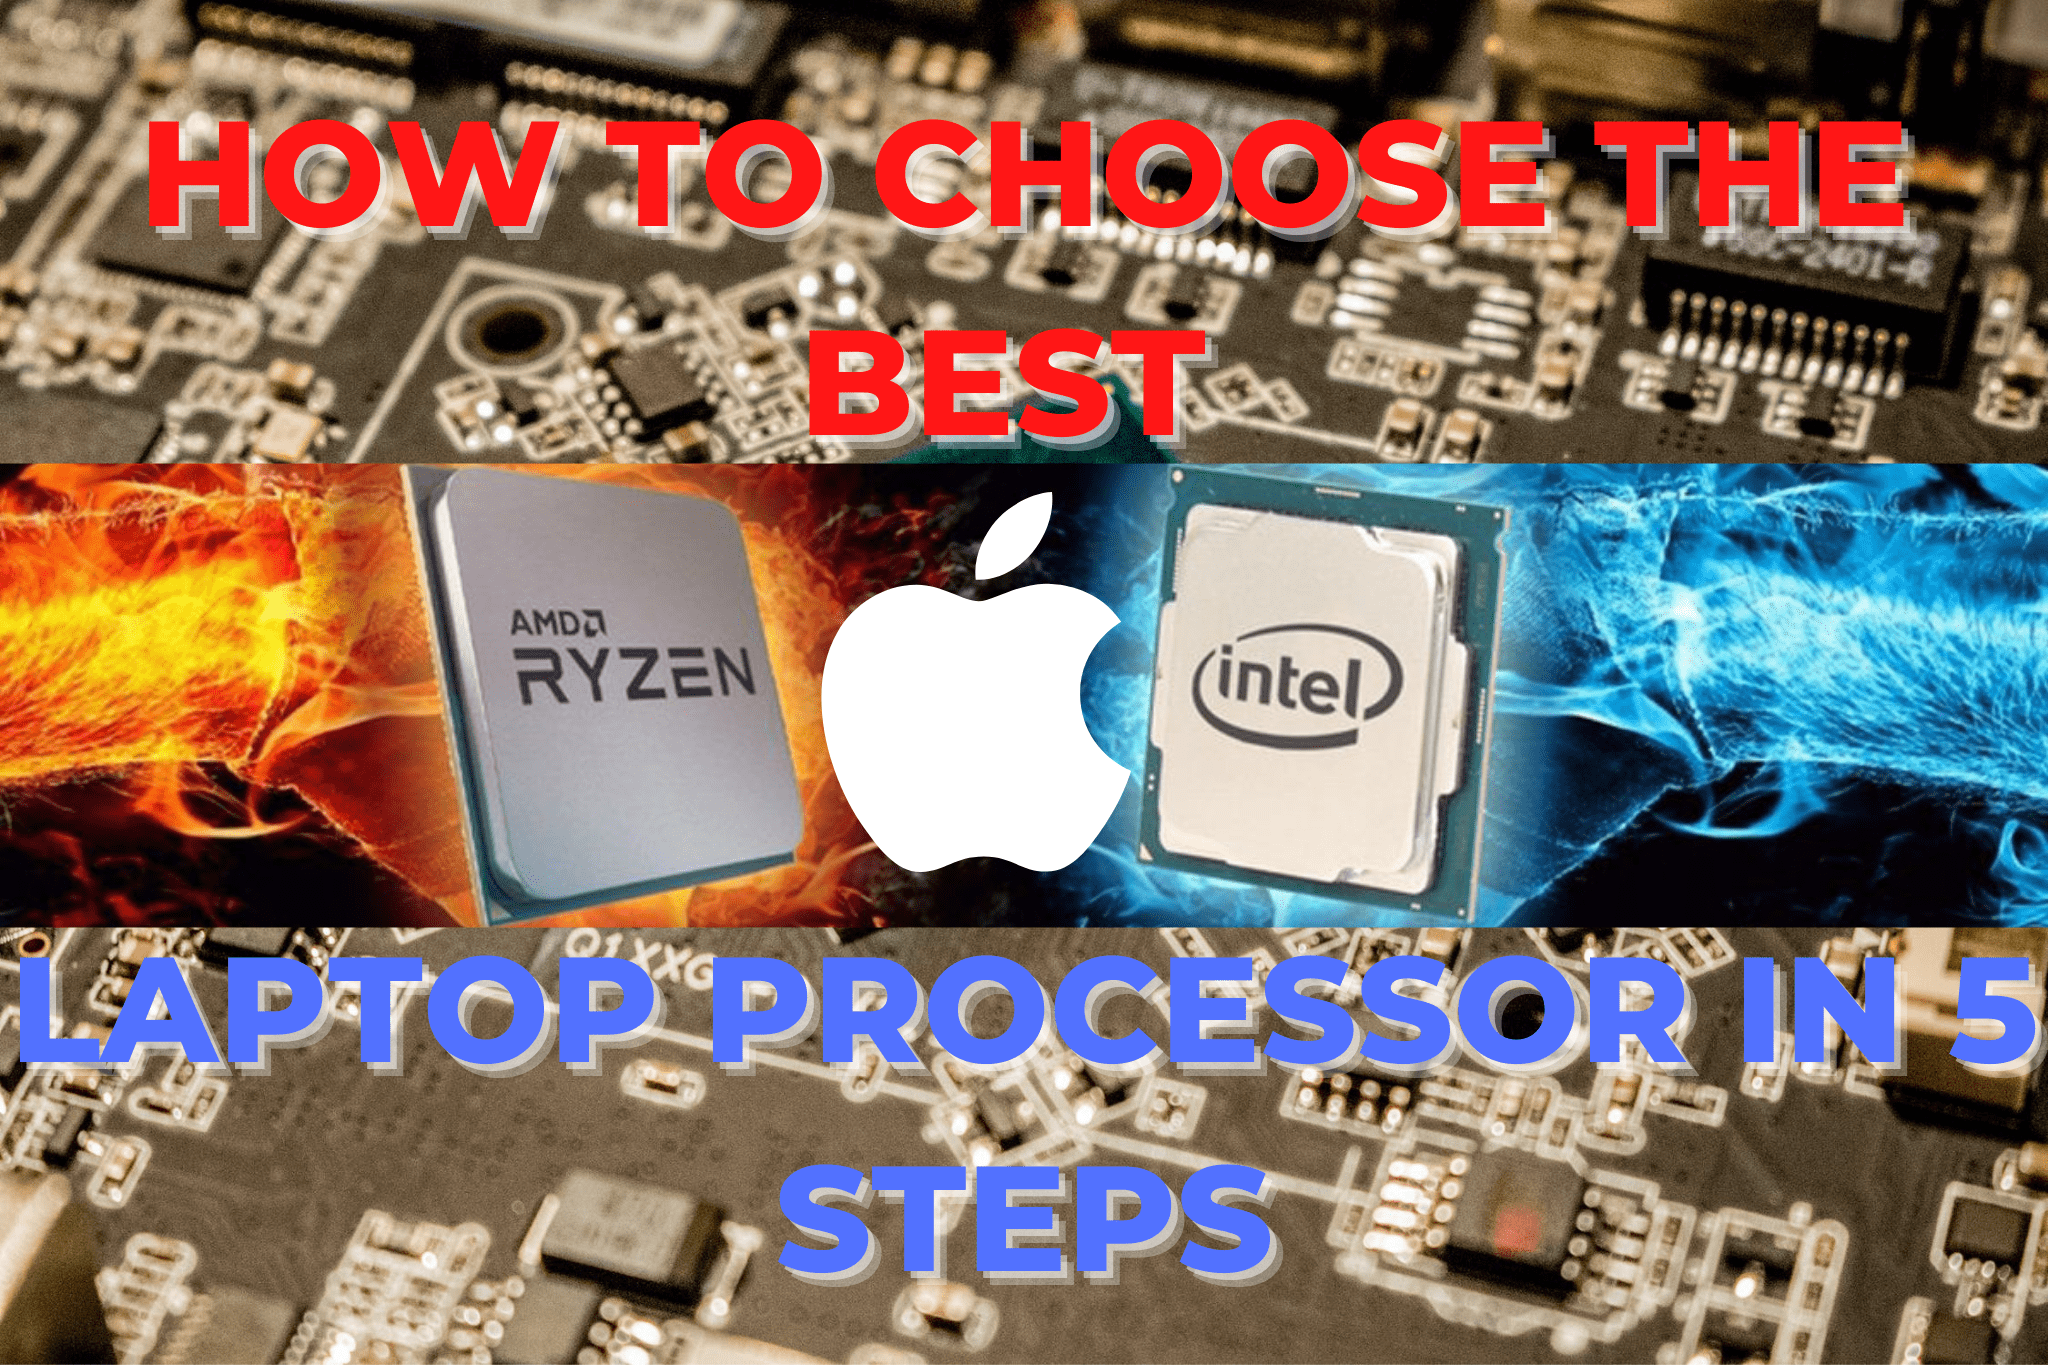 https://ticktocktech.com/computer-repair-omaha/wp-content/uploads/sites/21/2022/02/HOW-TO-CHOOSE-THE-BEST-LAPTOP-PROCESSOR-IN-5-STEPS-min.png